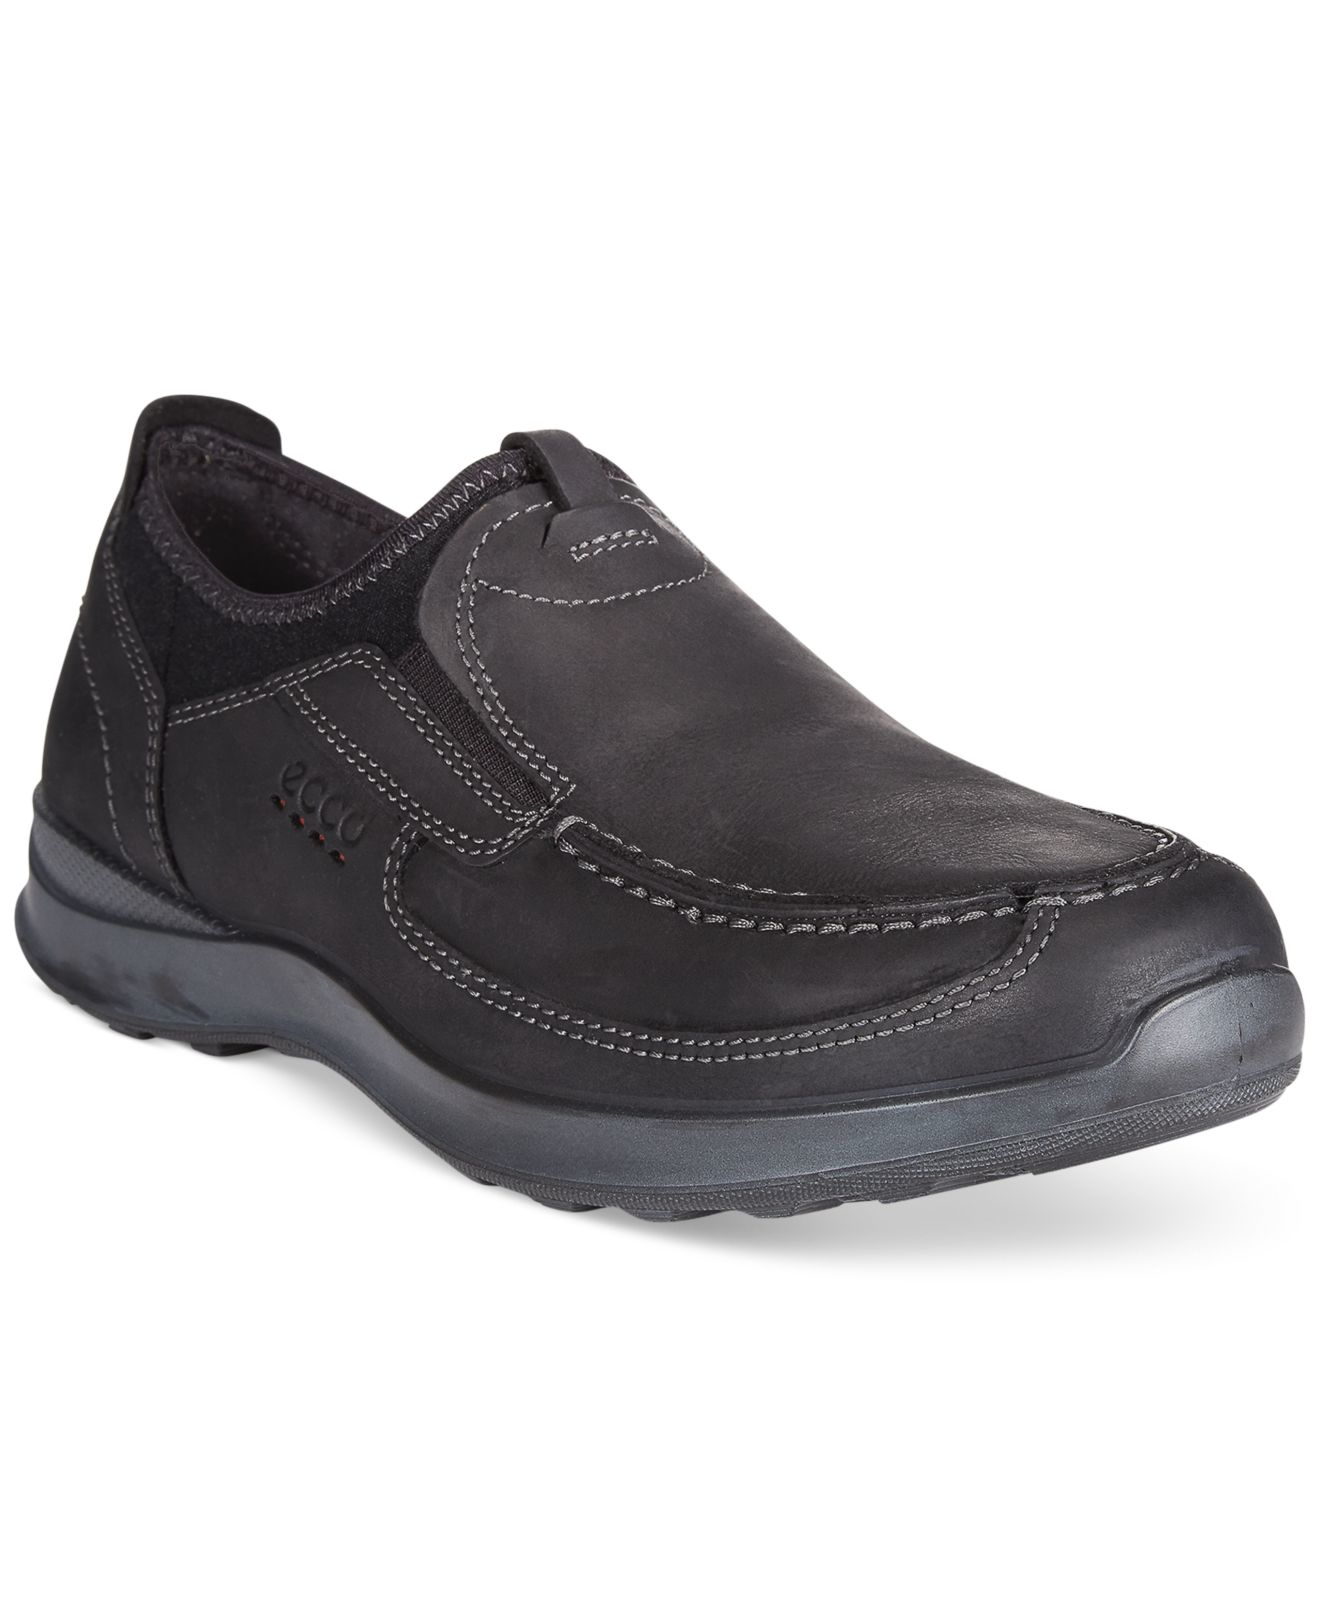 Lyst - Ecco Men's Hayes Casual Loafers in Black for Men